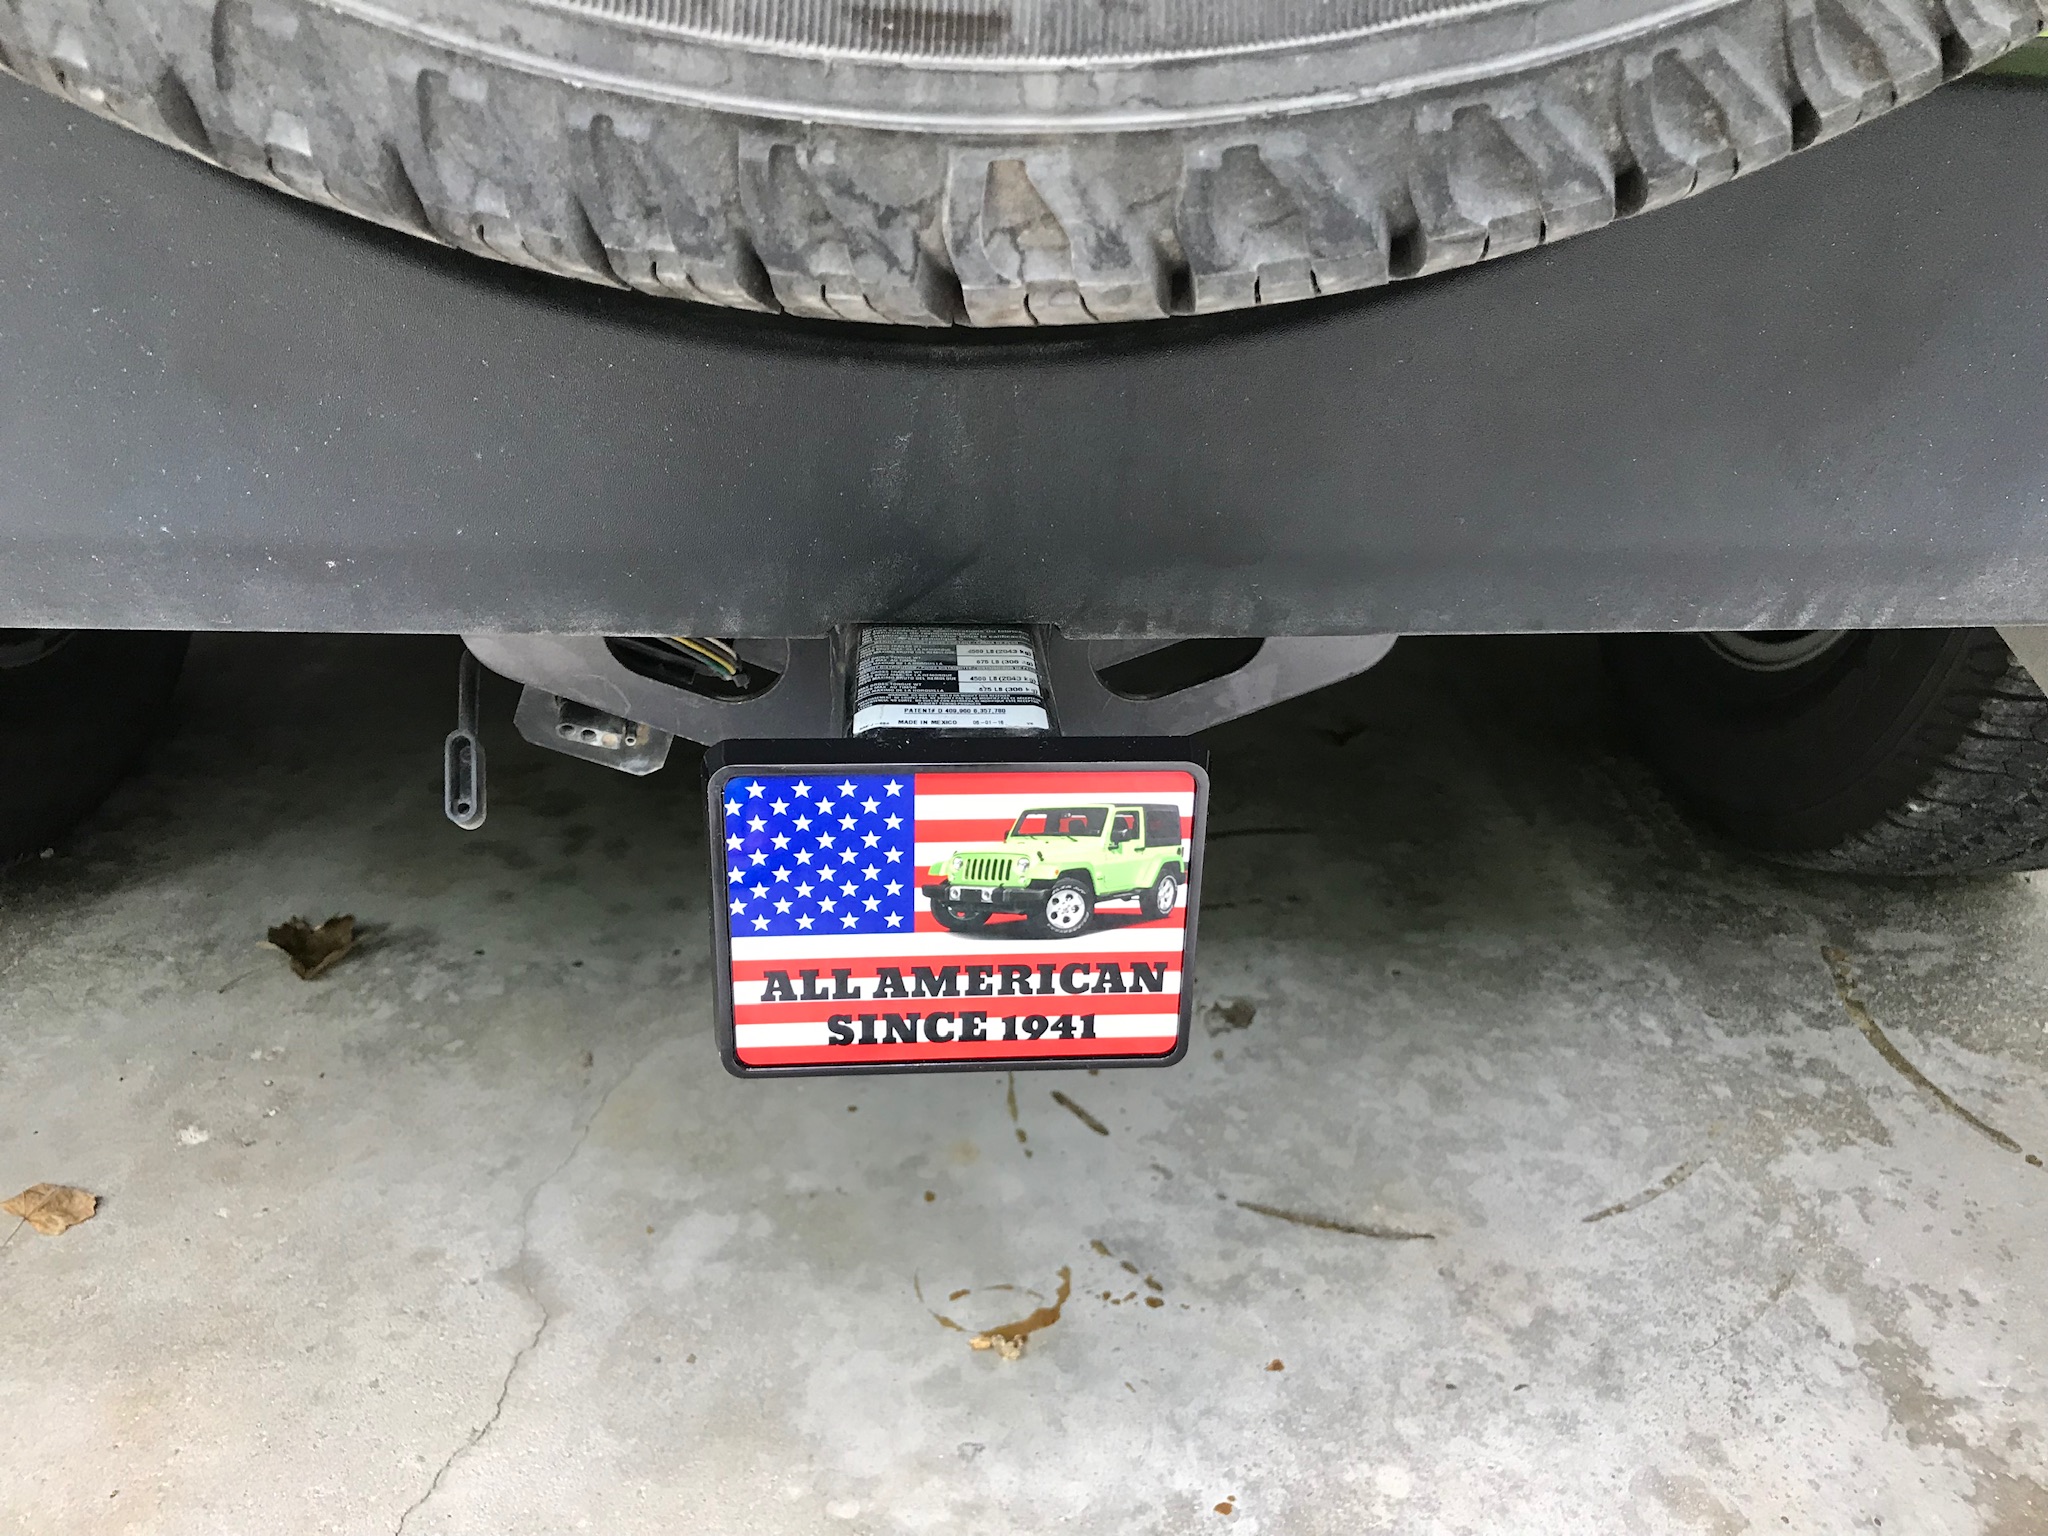 Jeep HITCH COVER made with sublimation printing